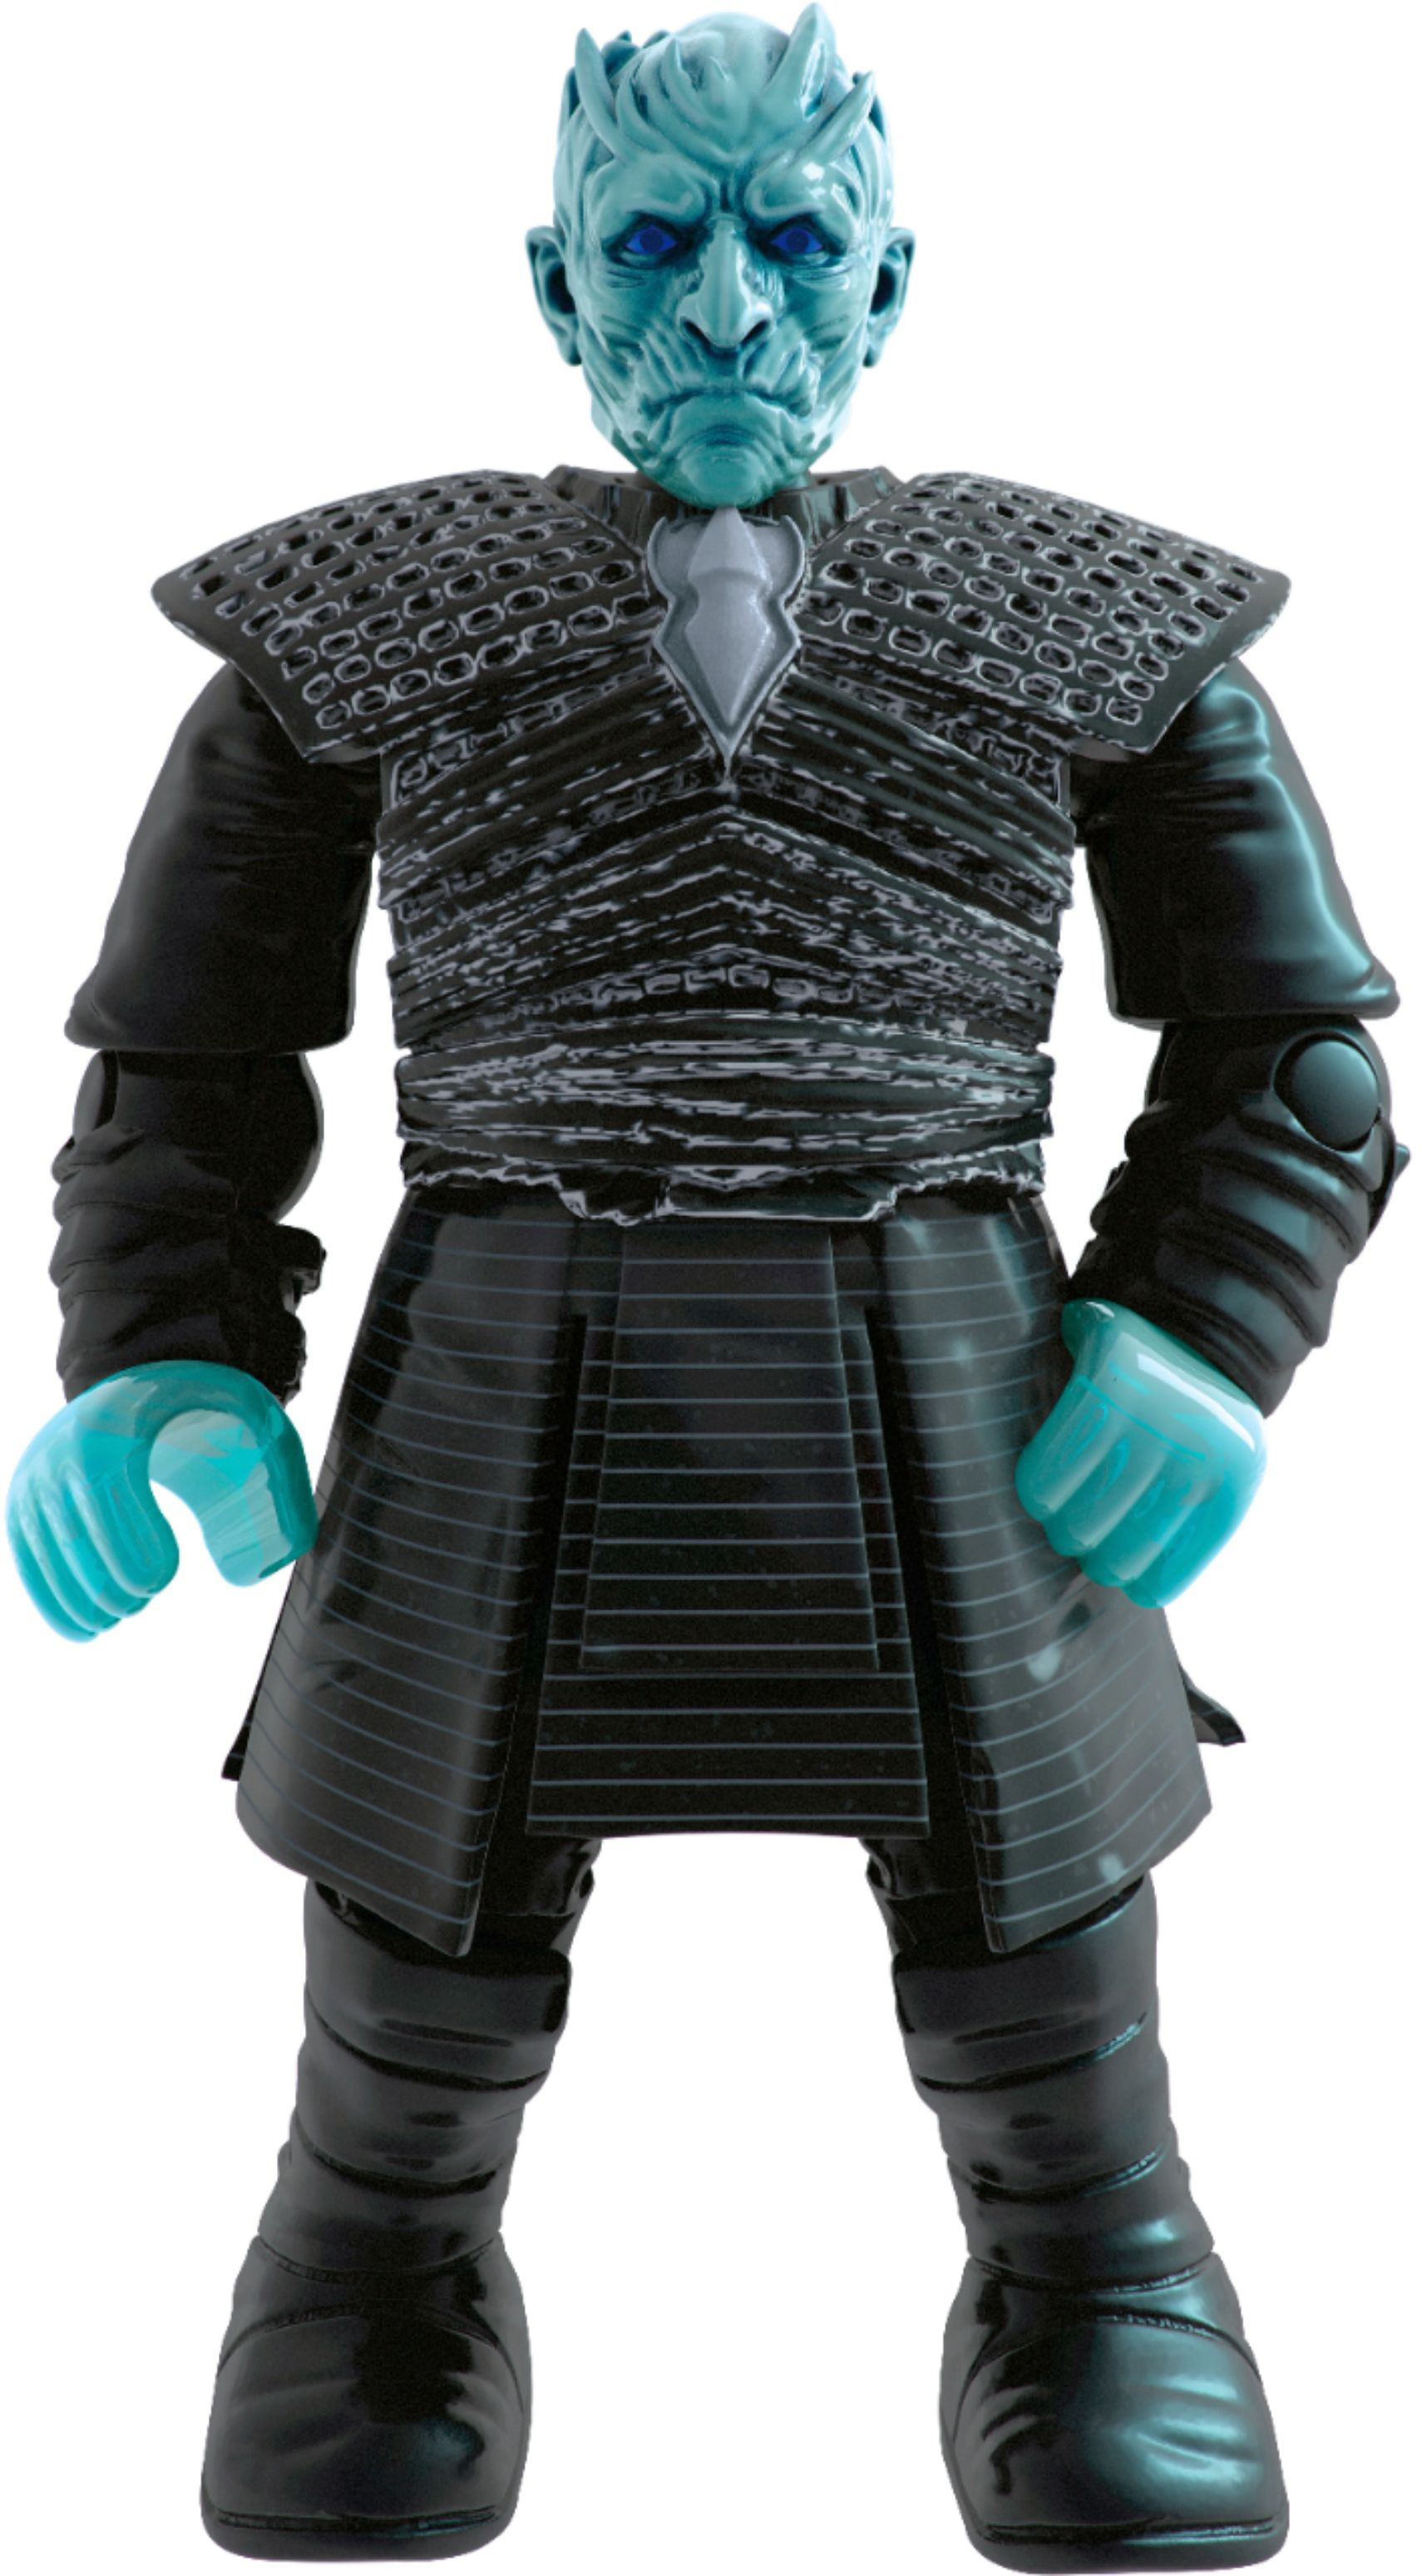 Game of Thrones The Iron Throne Set Gkm68 for sale online MEGA Construx Black Series 